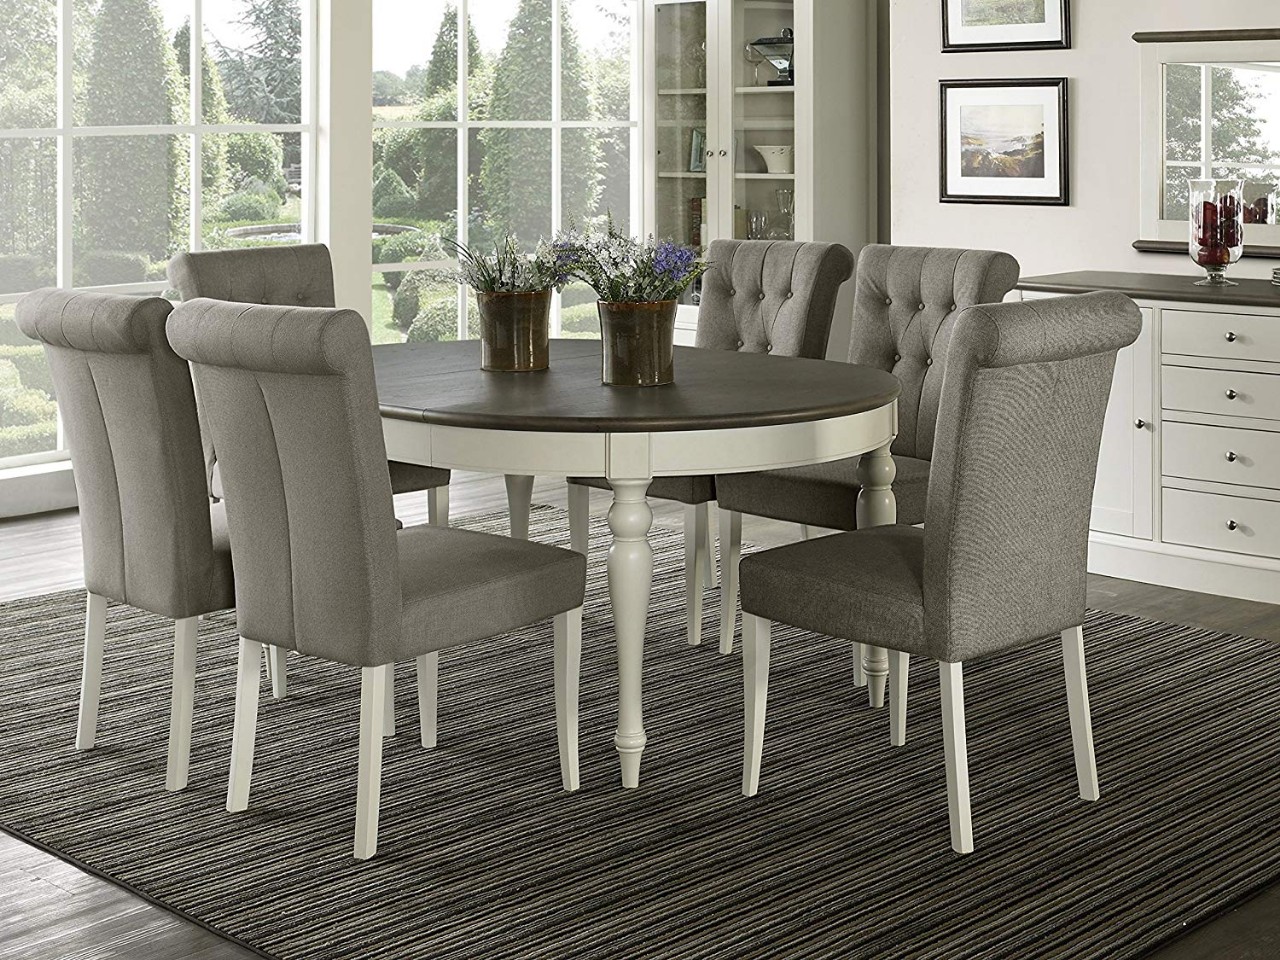 Vegas 7 Piece Round To Oval Extension Dining Table Set for 6 Parsons